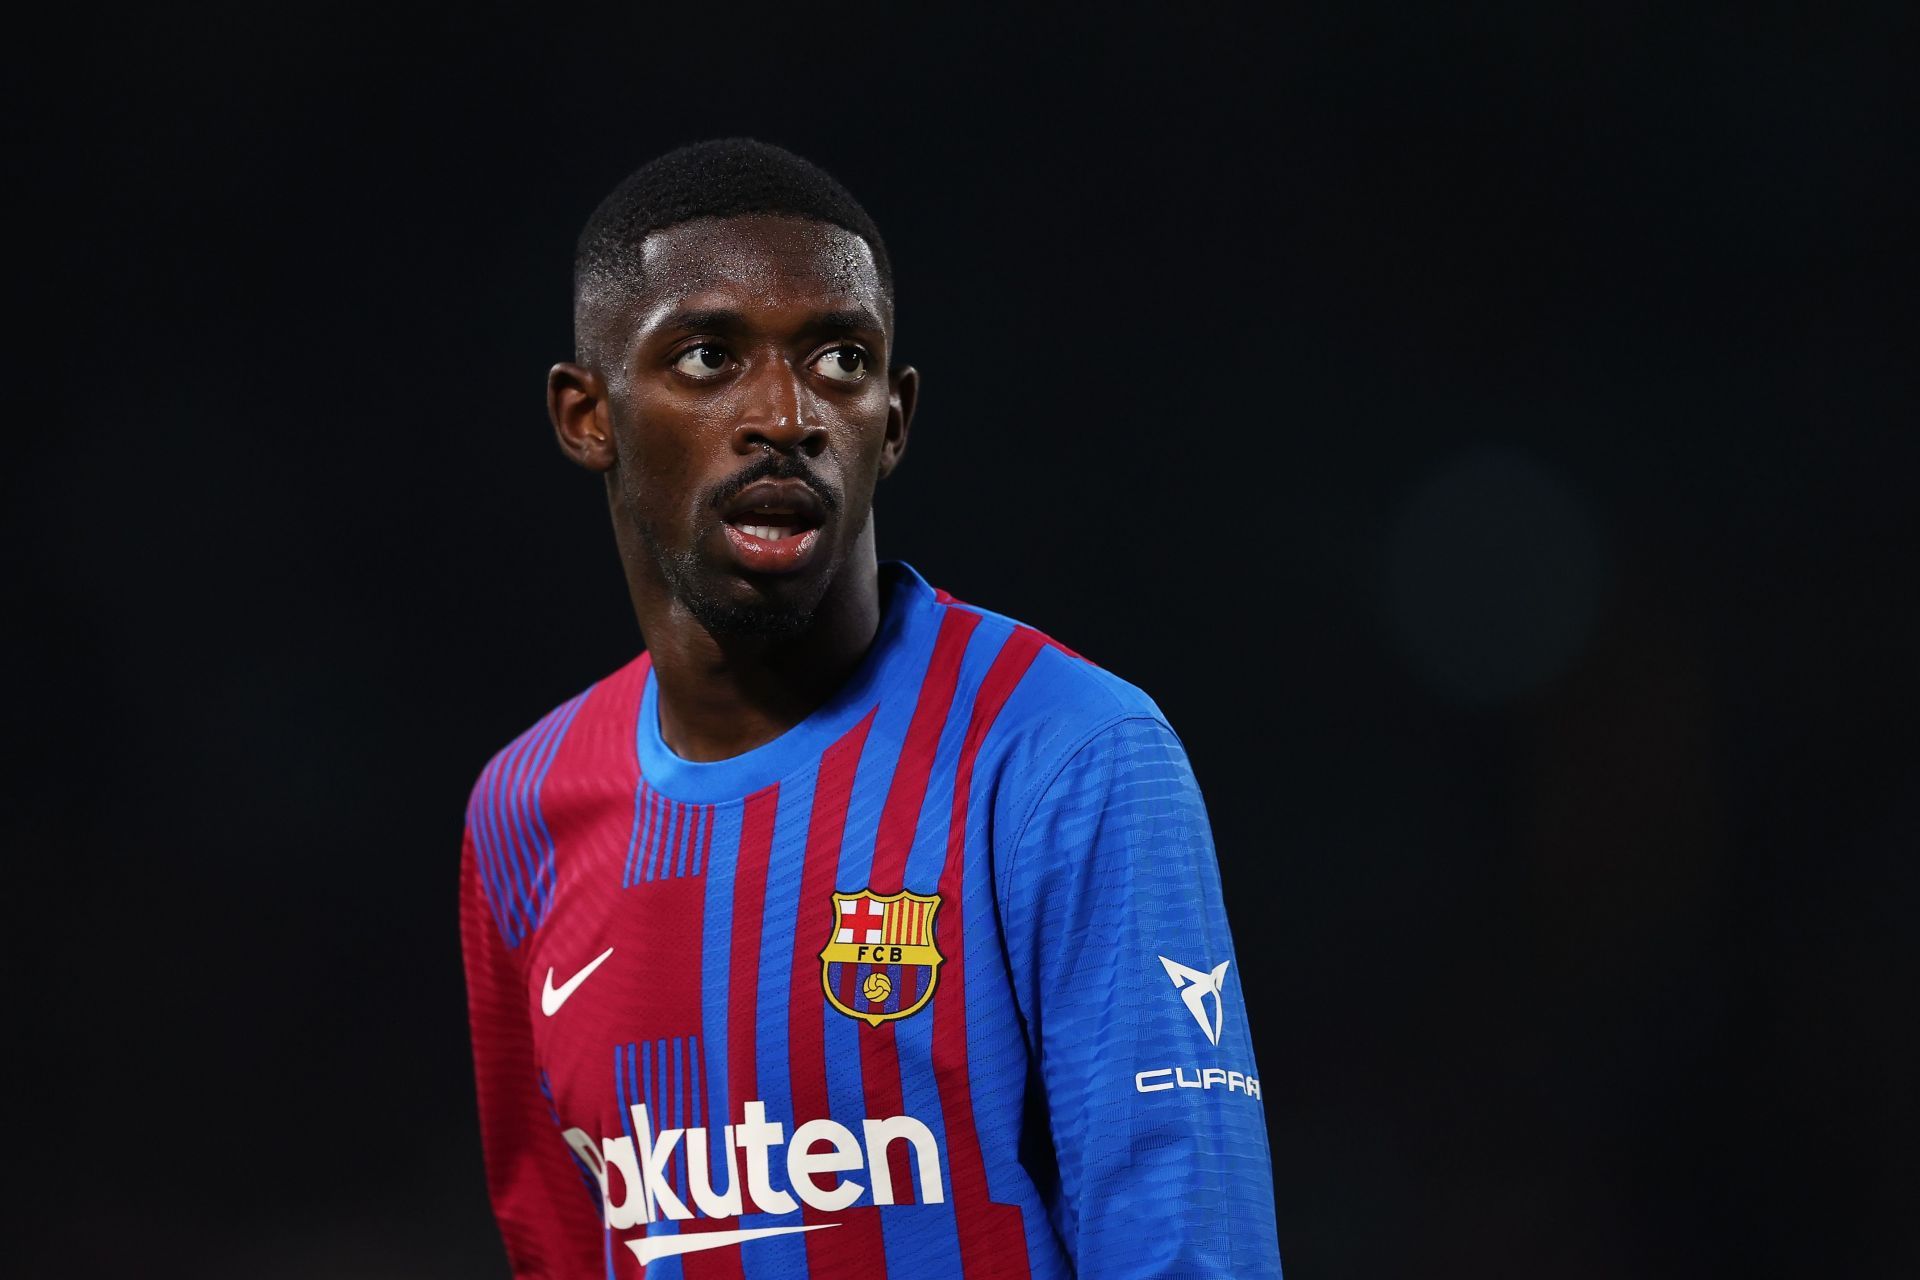 Ousmane Dembele will not be moving to the Parc des Princes this summer.